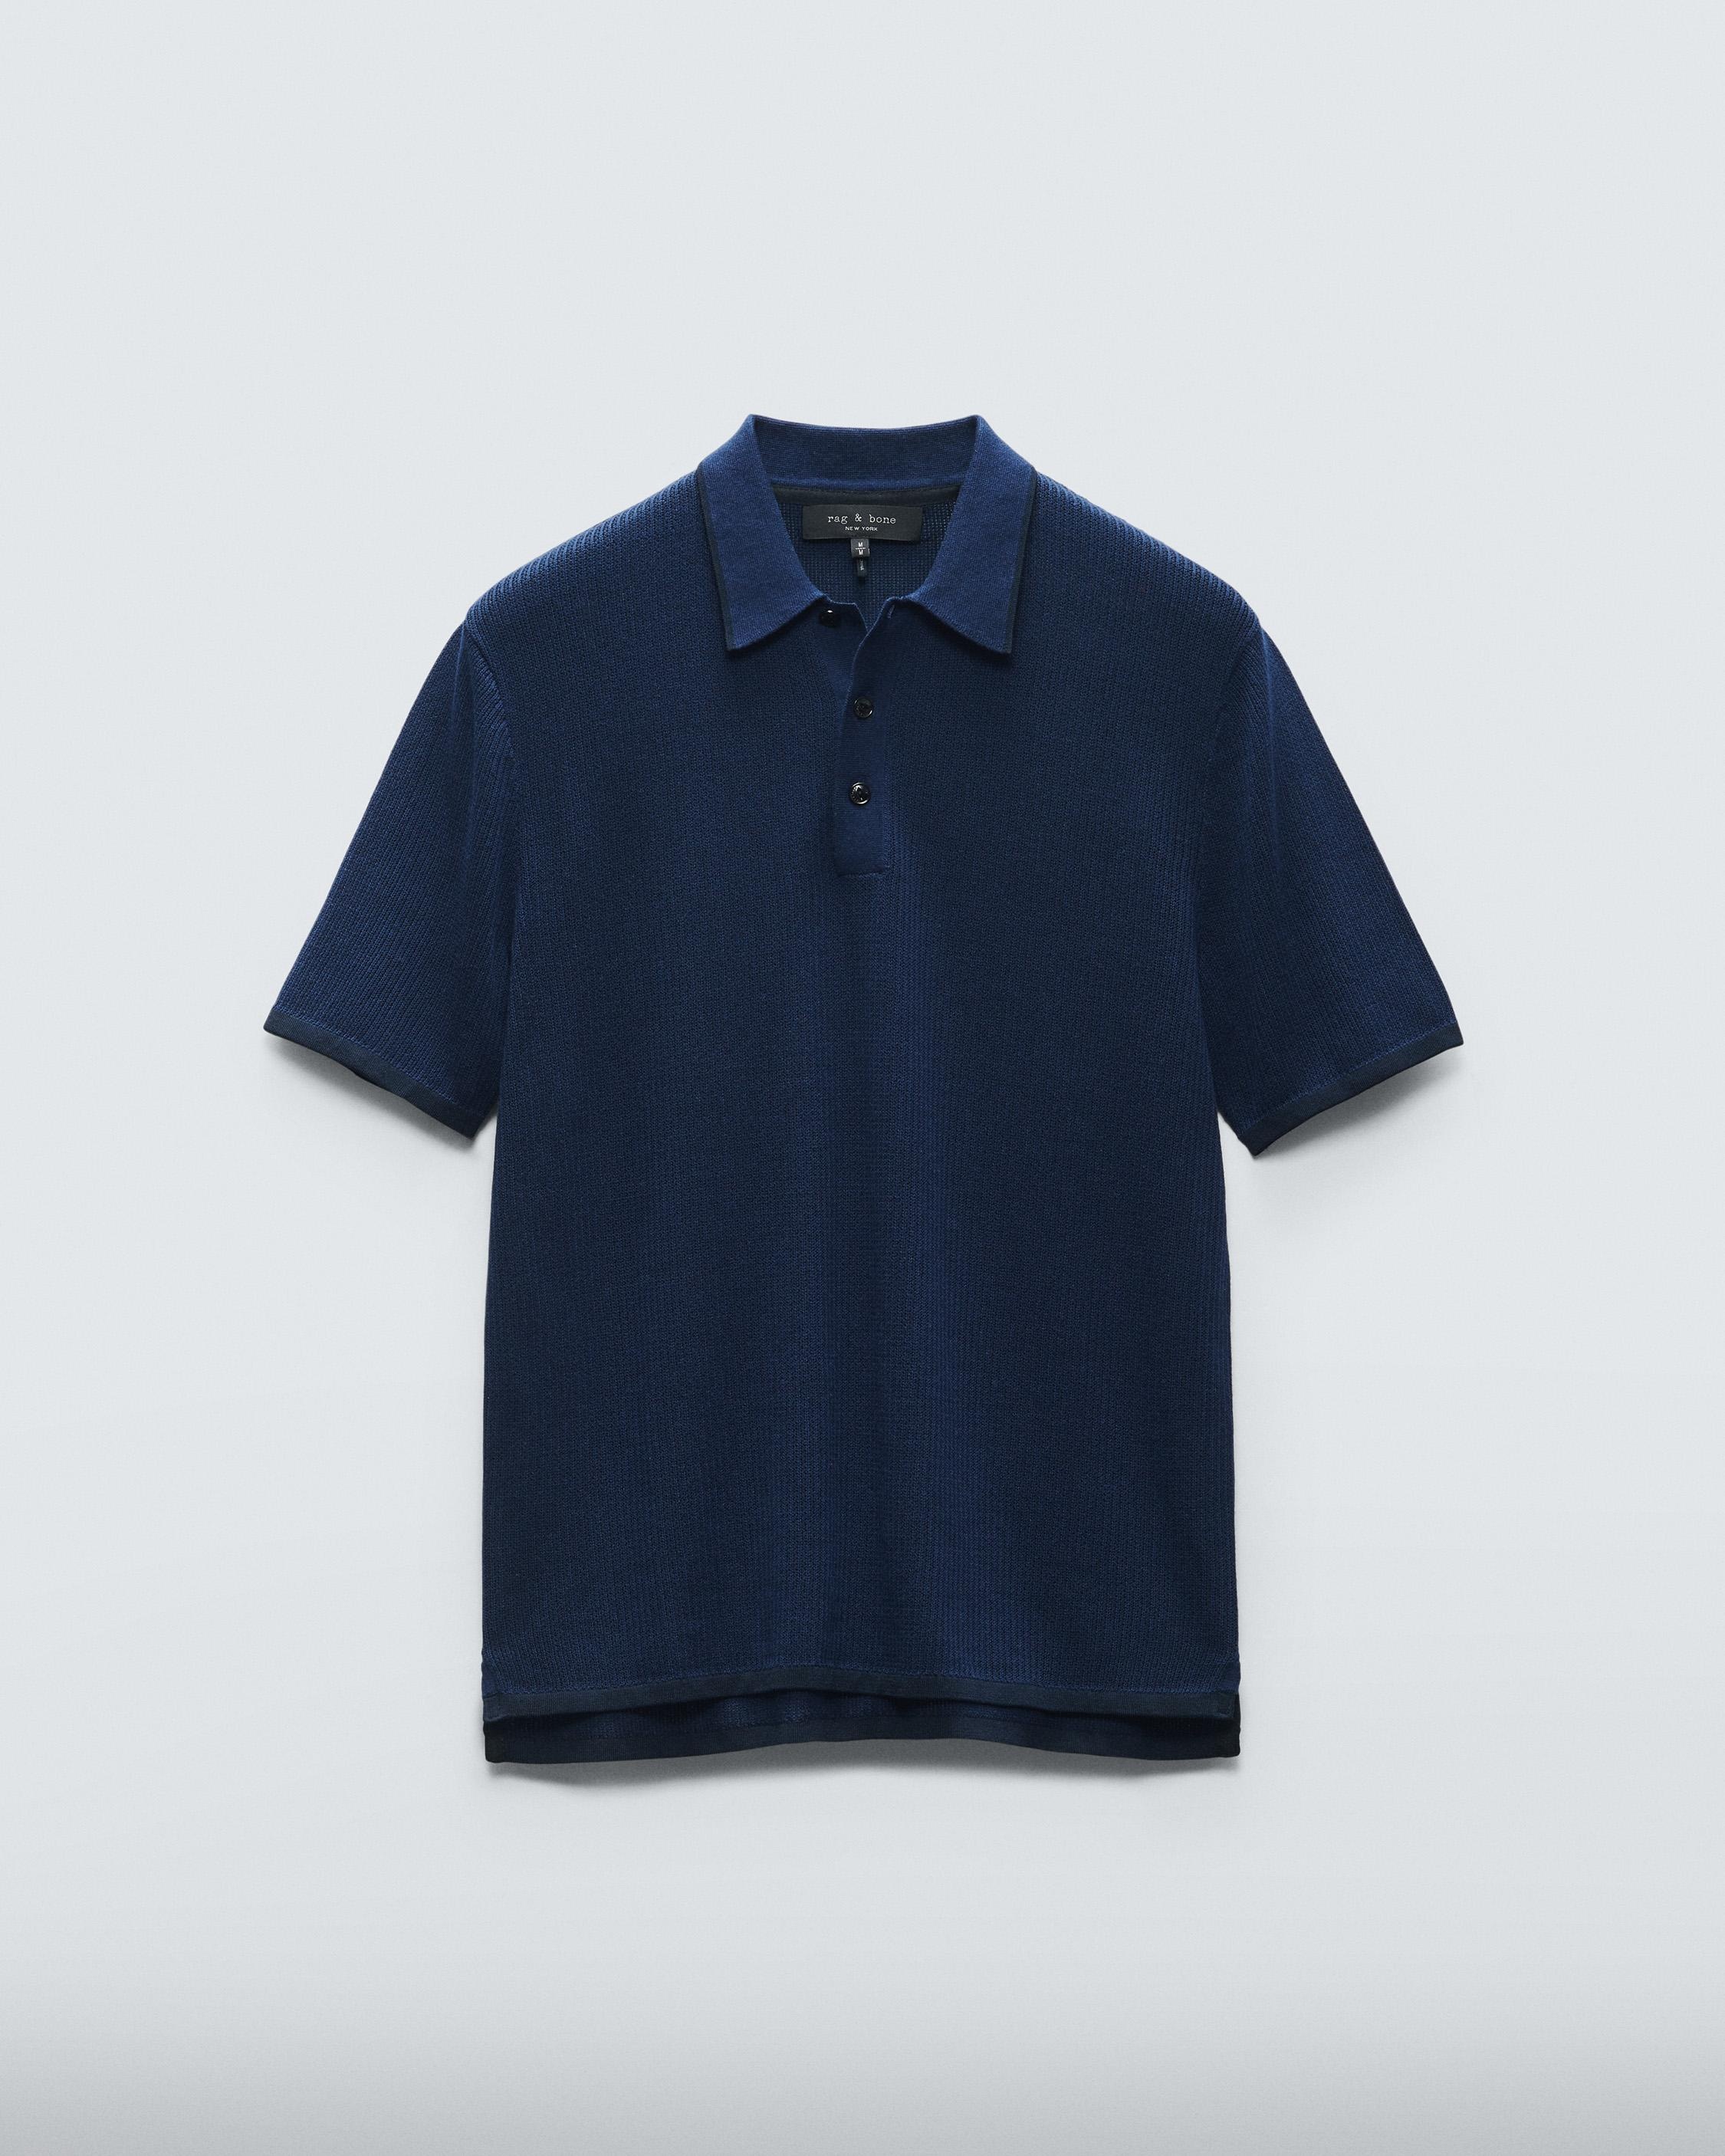 Harvey Polo
Classic Fit - 1